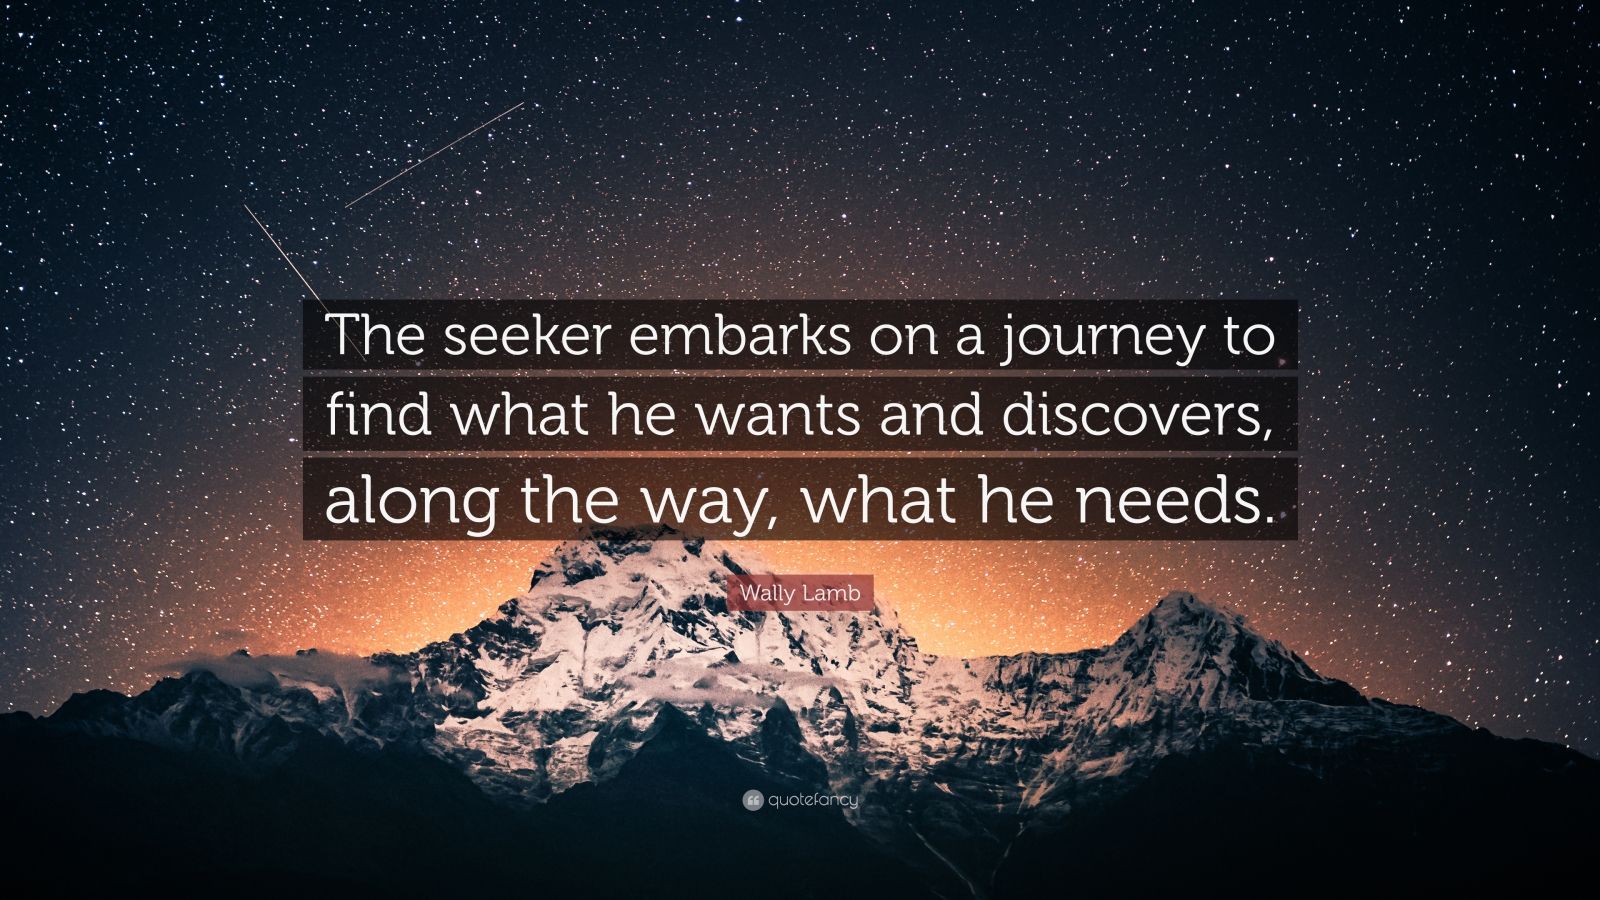 Wally Lamb Quote: “The seeker embarks on a journey to find what he